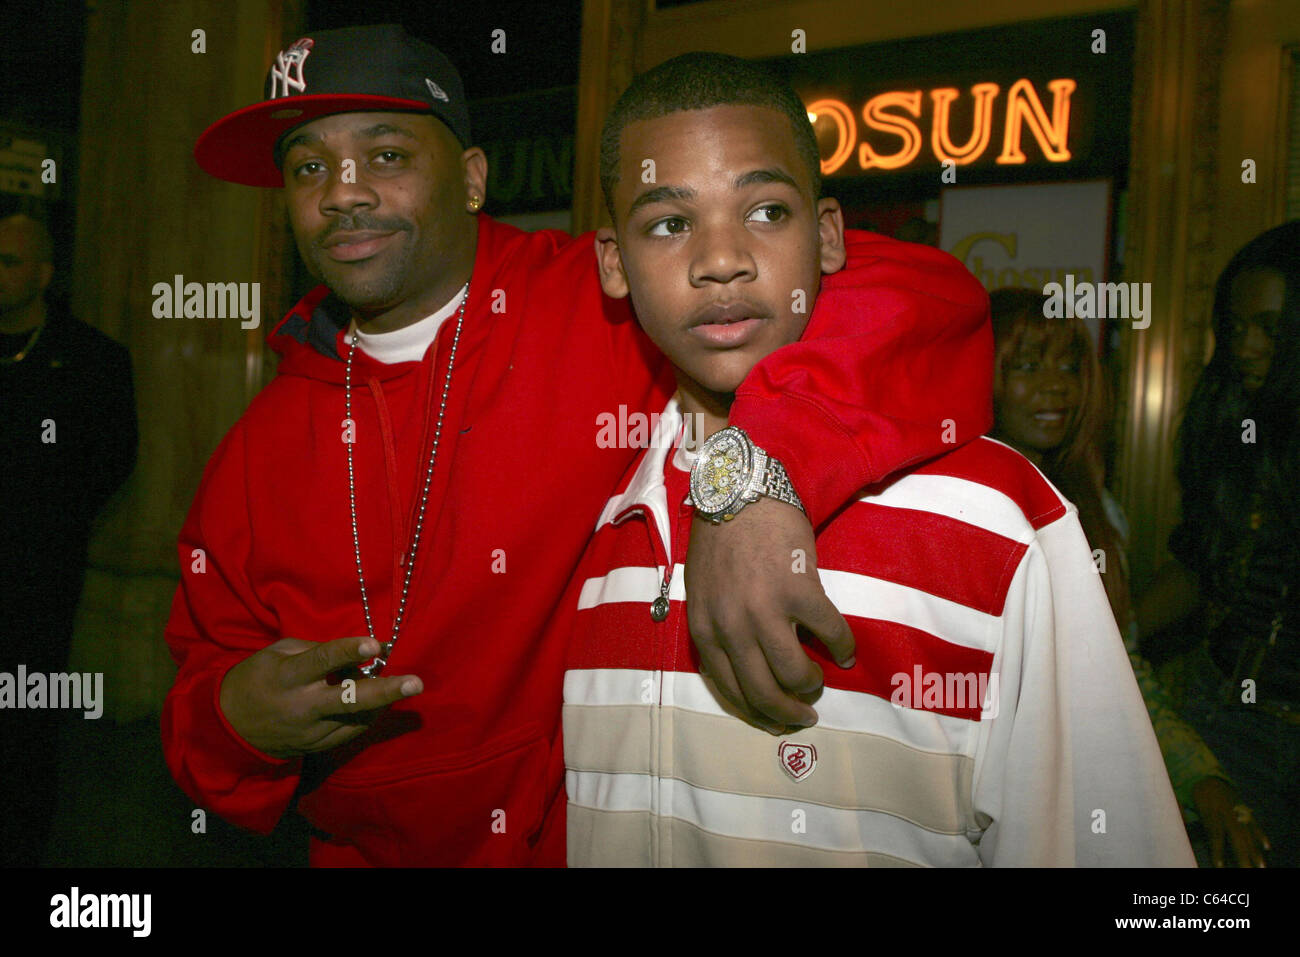 Damon Dash, Guest at arrivals for The Emancipation of Mimi Release Party, Cipriani Restaurant, New York, NY, April 21, 2005. Photo by: Gregorio Binuya/Everett Collection Stock Photo